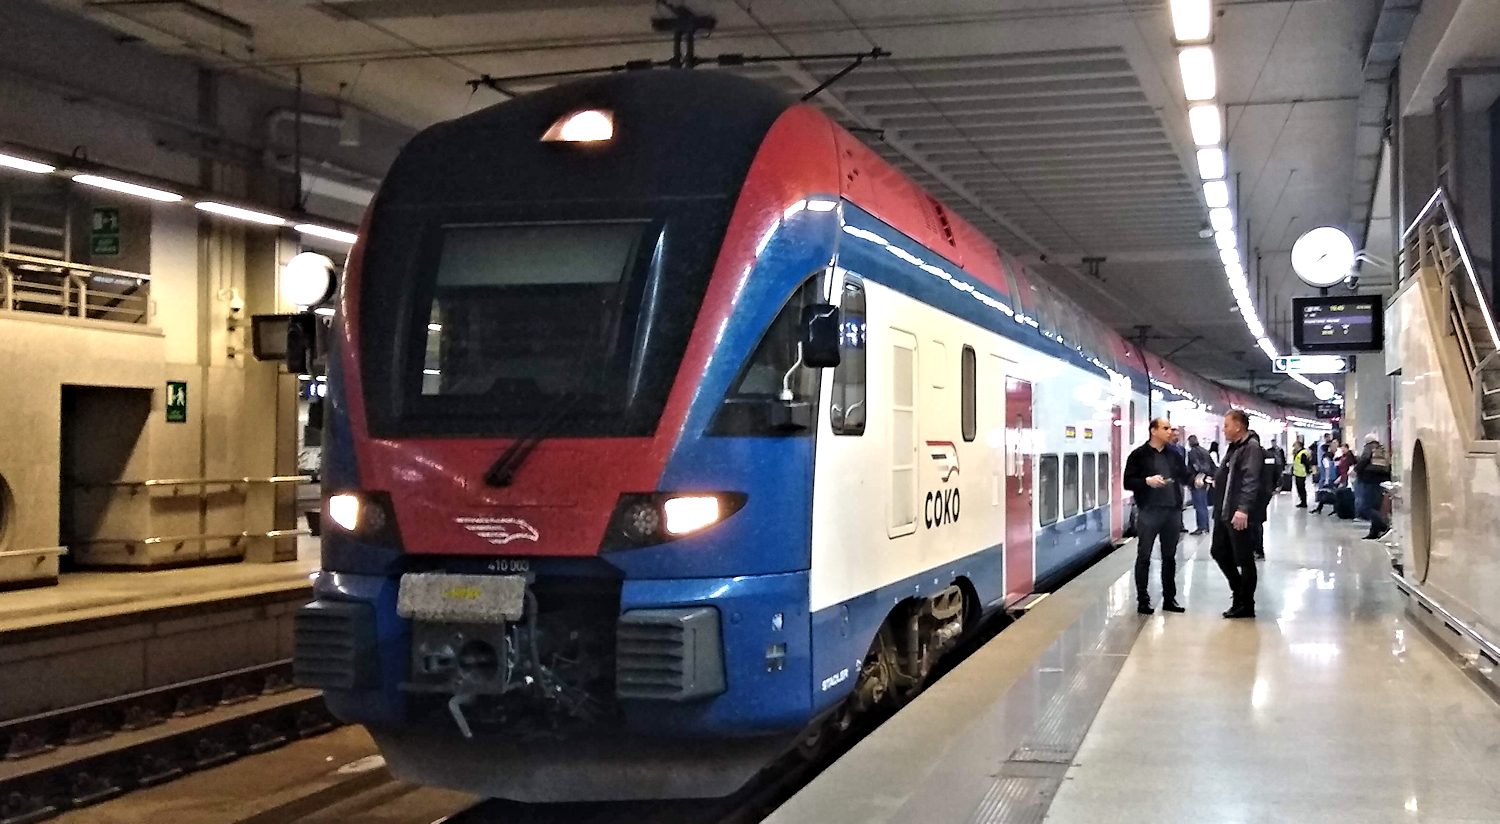 A train in Montenegro waiting in the station